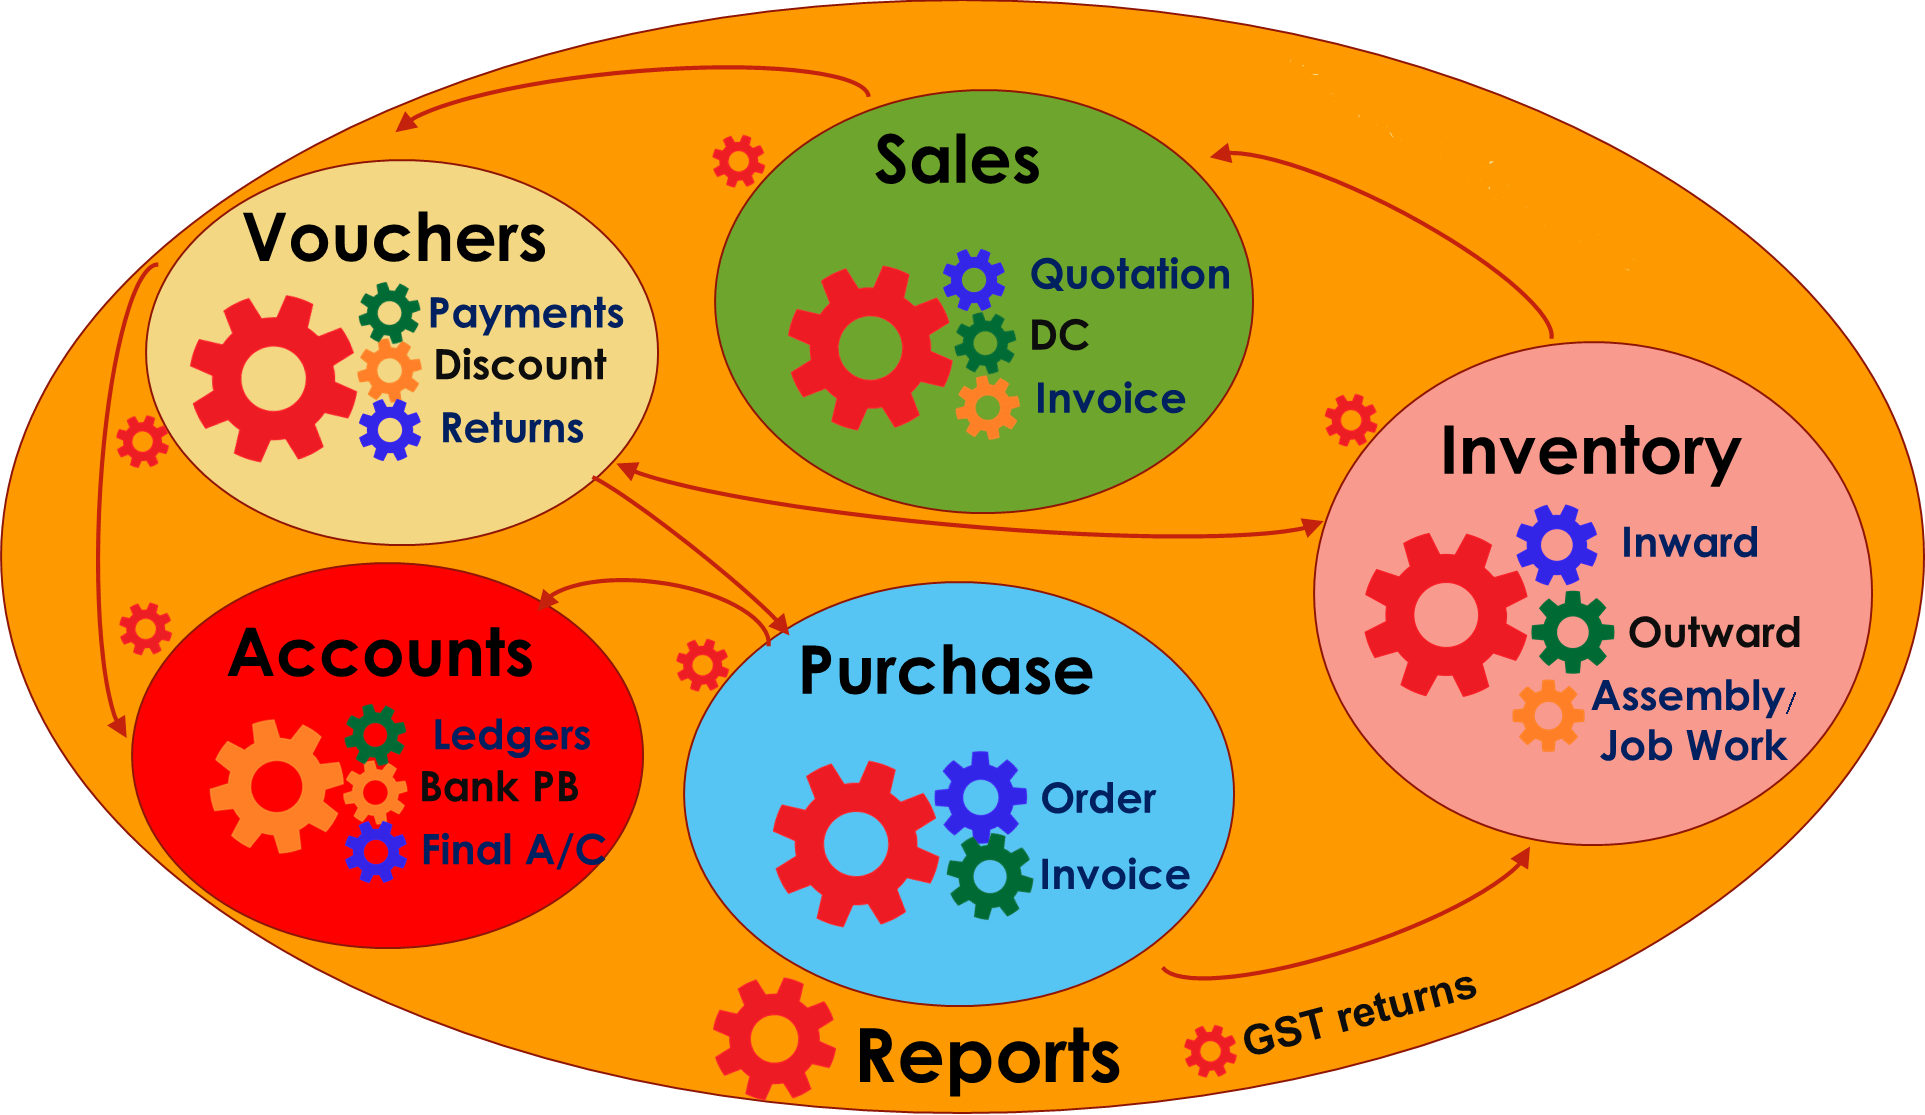 3DT ERP and CRM, Estimate, Quotation, DC, Invoice, Bill, Inventory, Stock, Account, Ledger, Reports